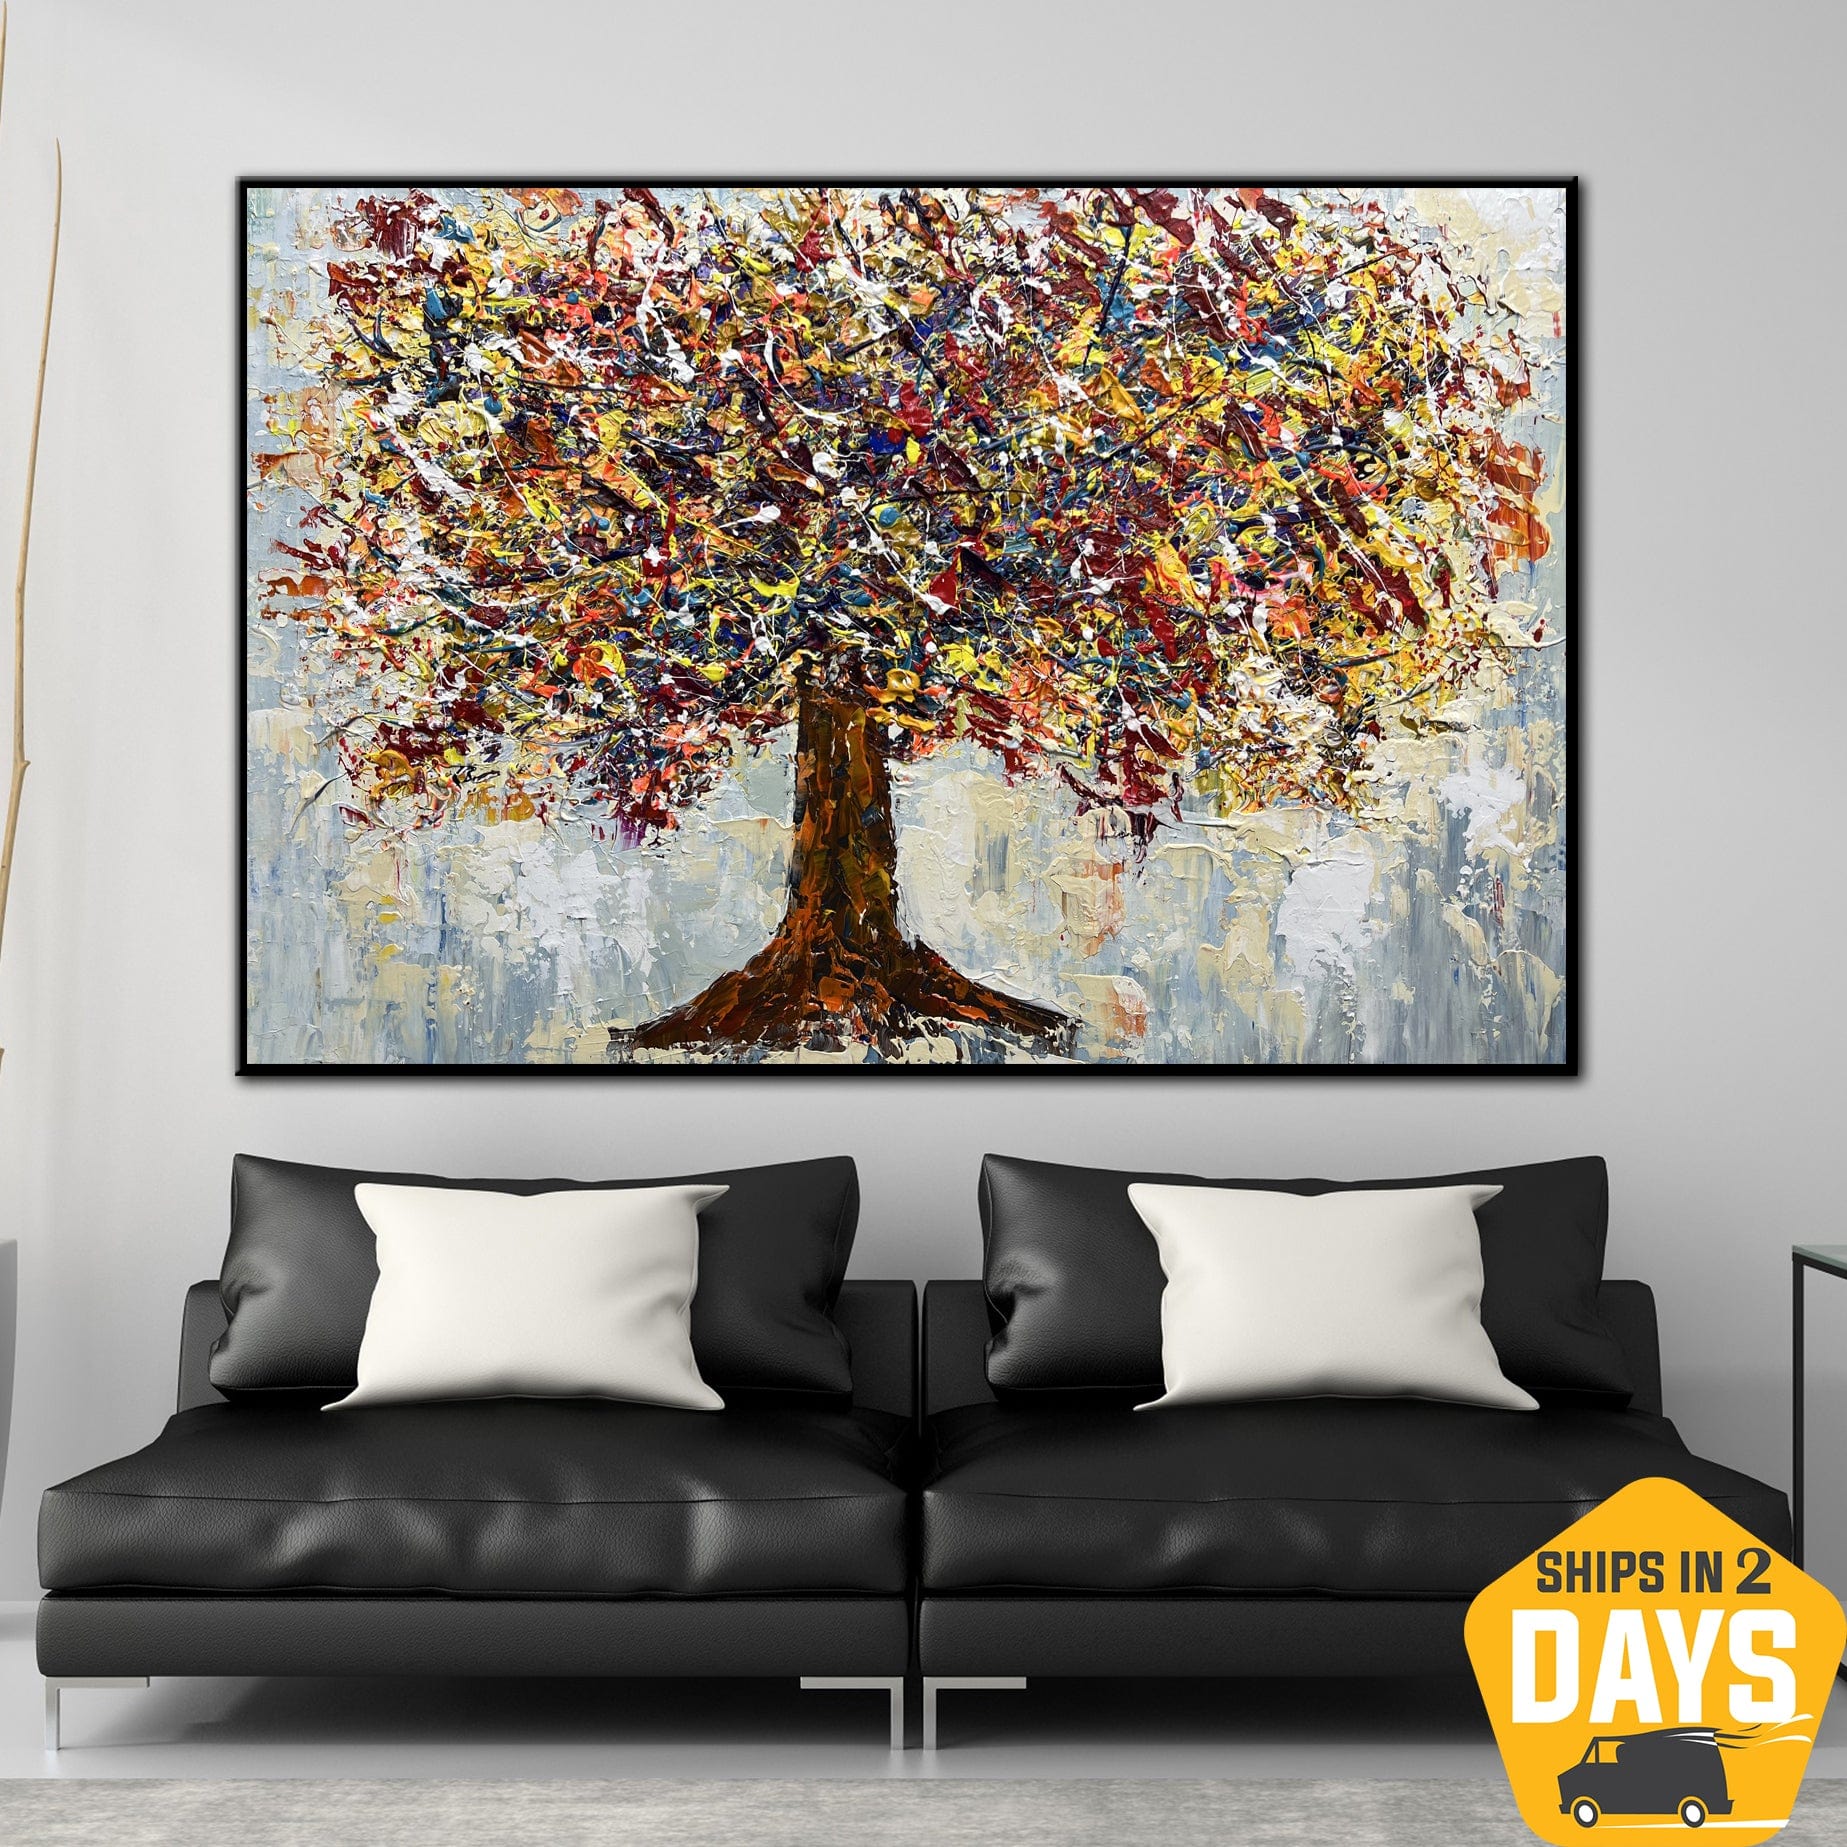 Blue and Gray 24x36 Textured Tree Art, Original Painting on Canvas